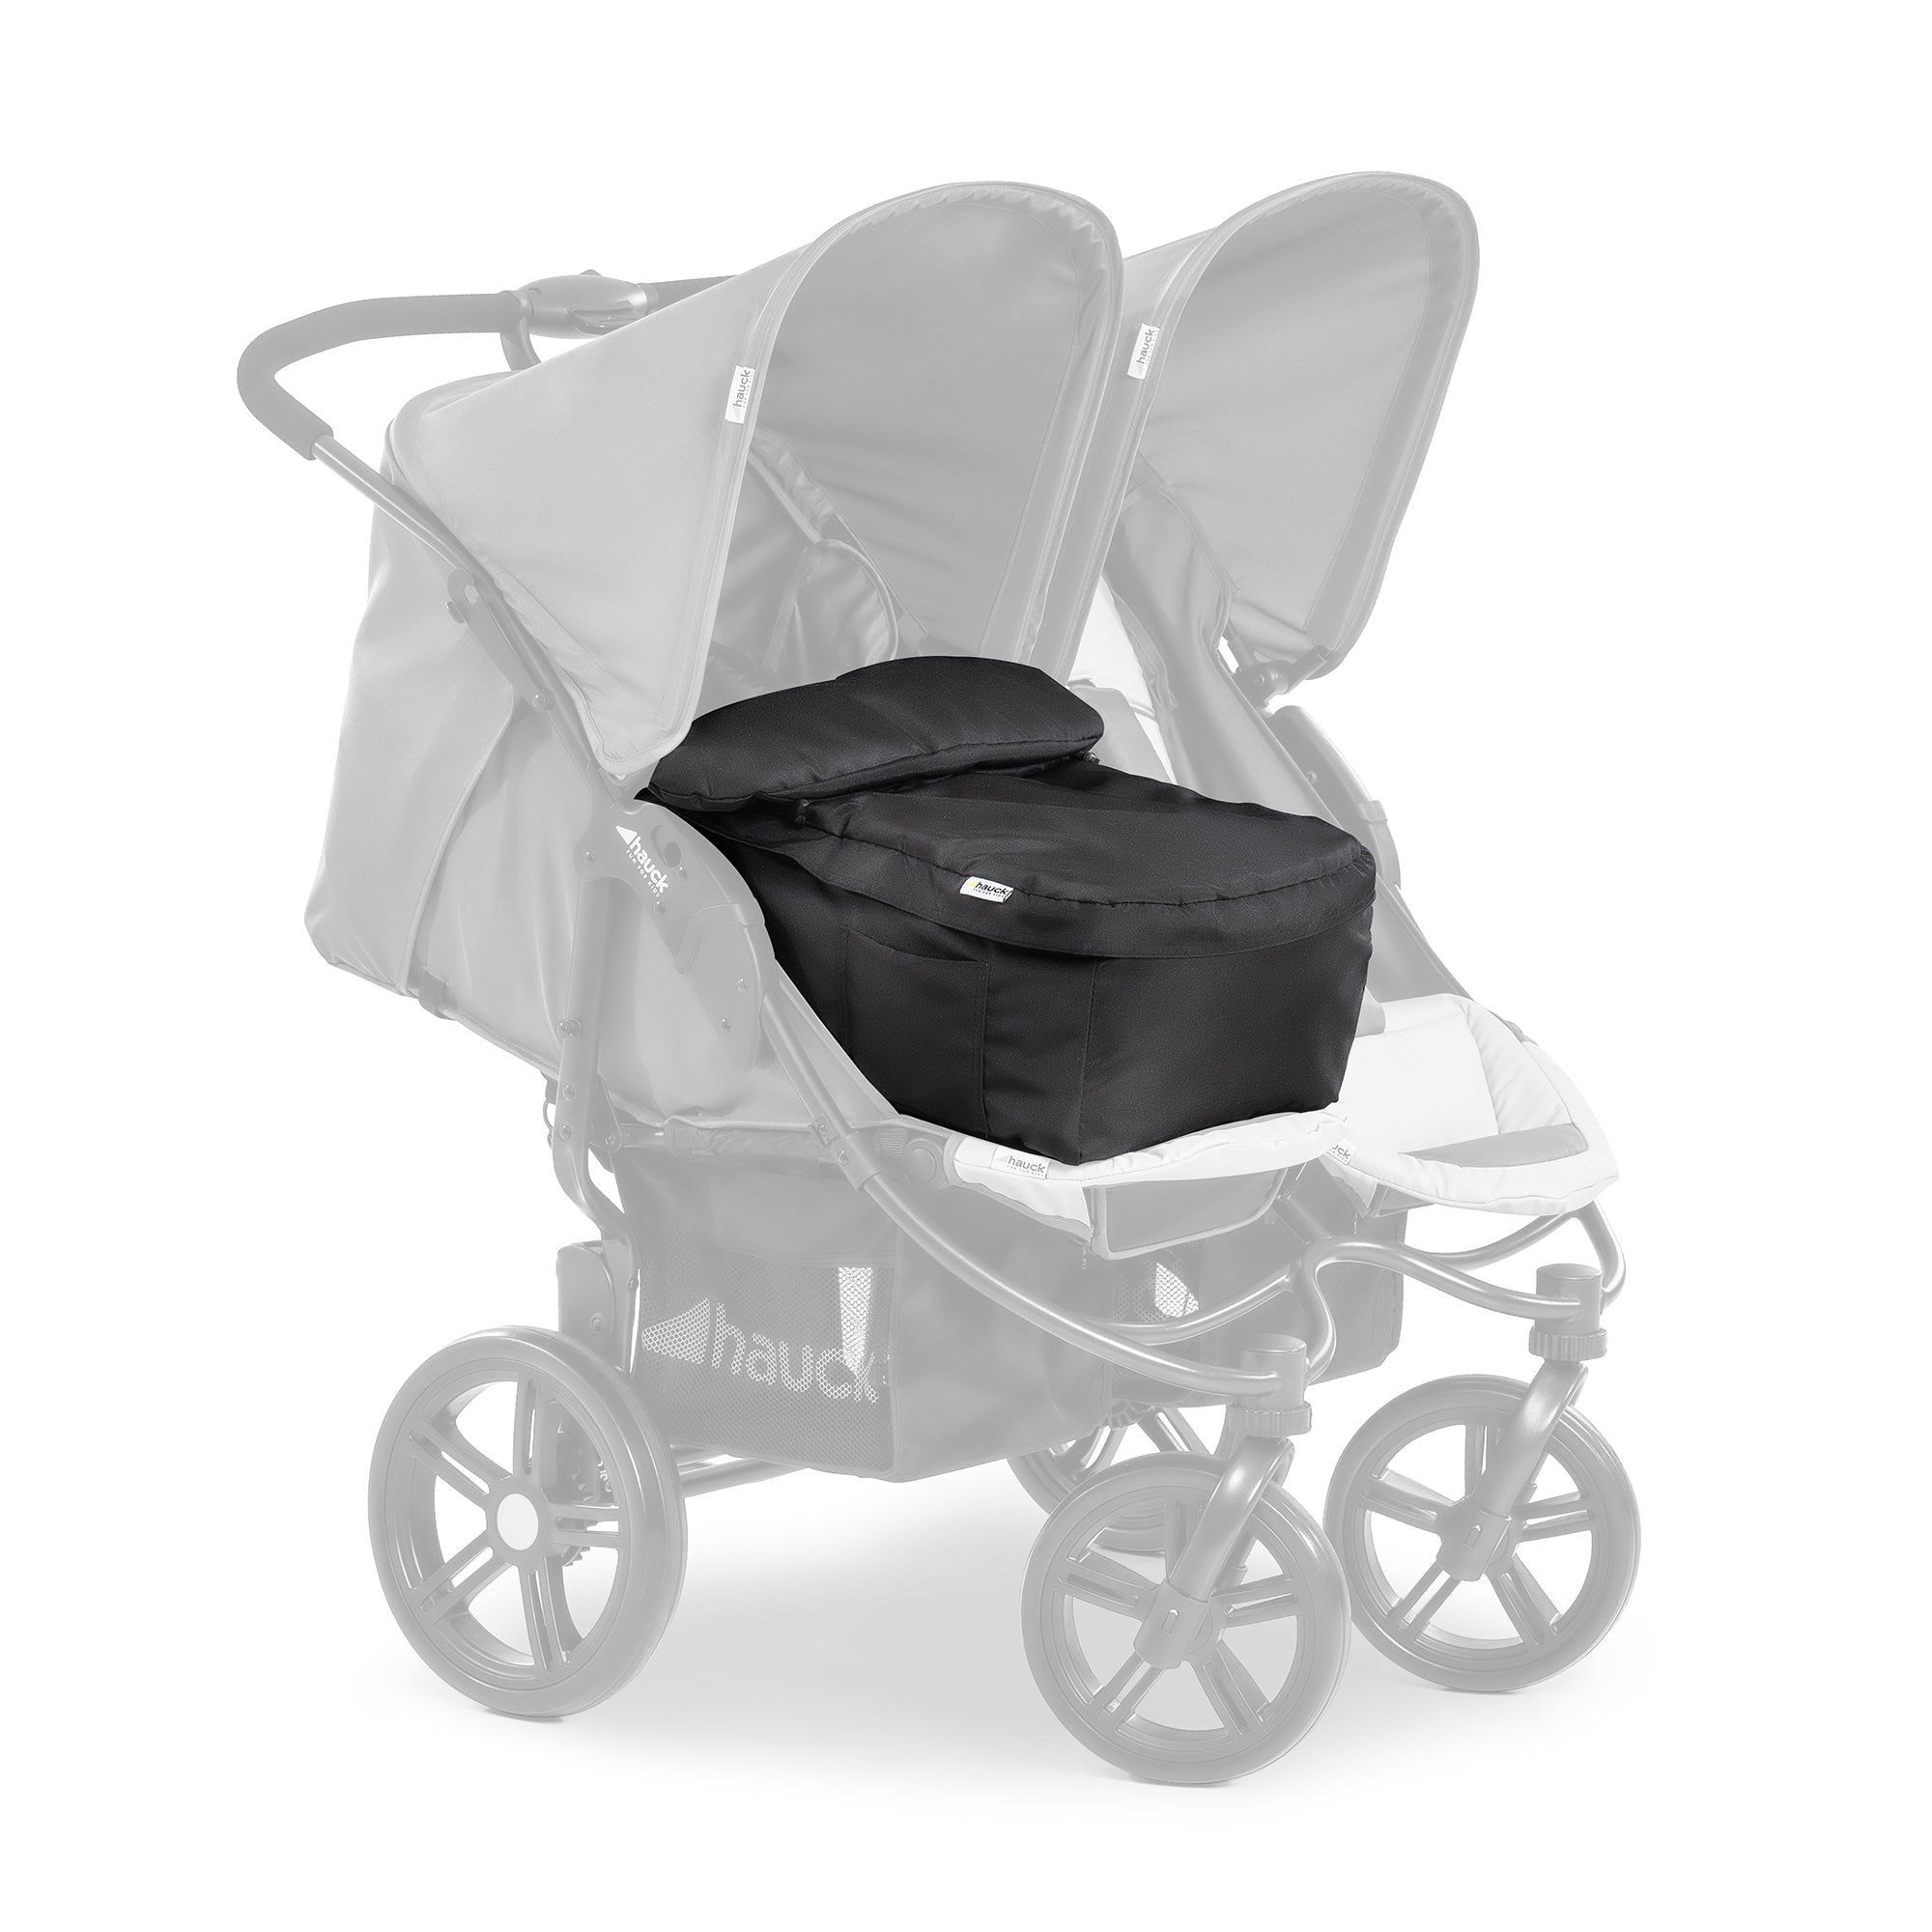 Hauck 2 in1 Carrycot || Fashion-Black || Birth+ to 9months - Toys4All.in